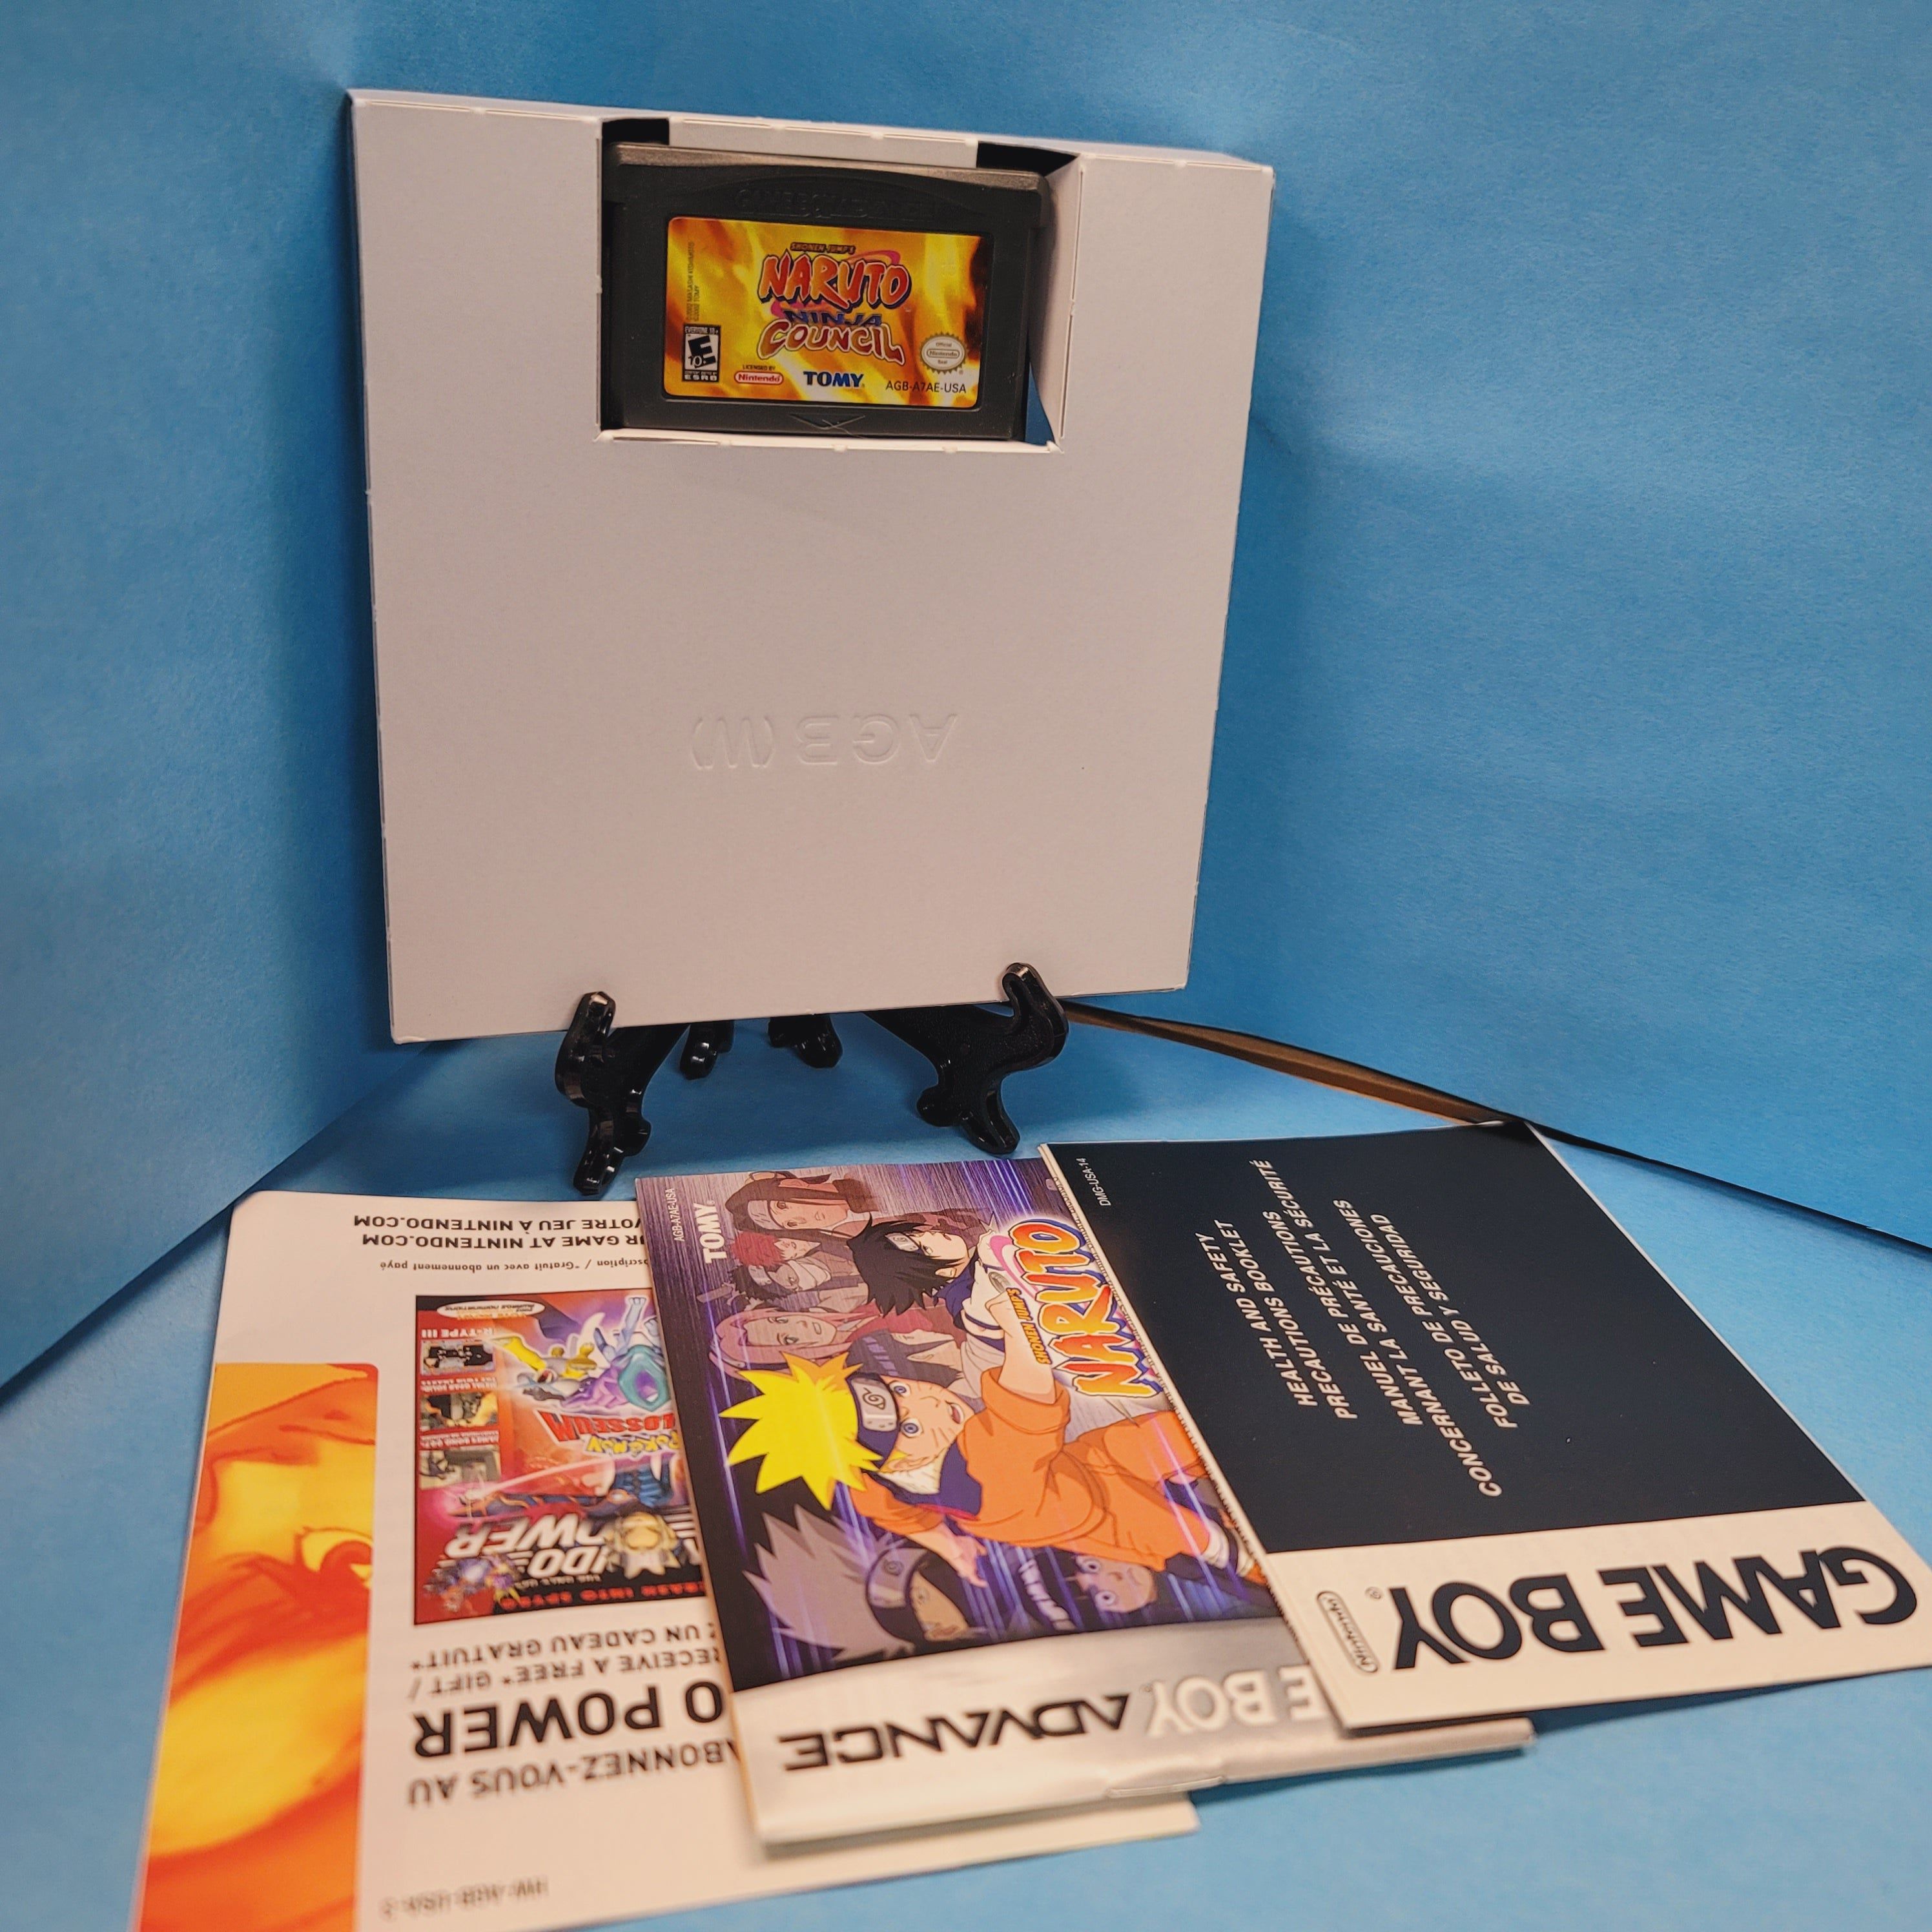 GBA - Naruto Ninja Council (Complete in Box / A+ / With Manual)